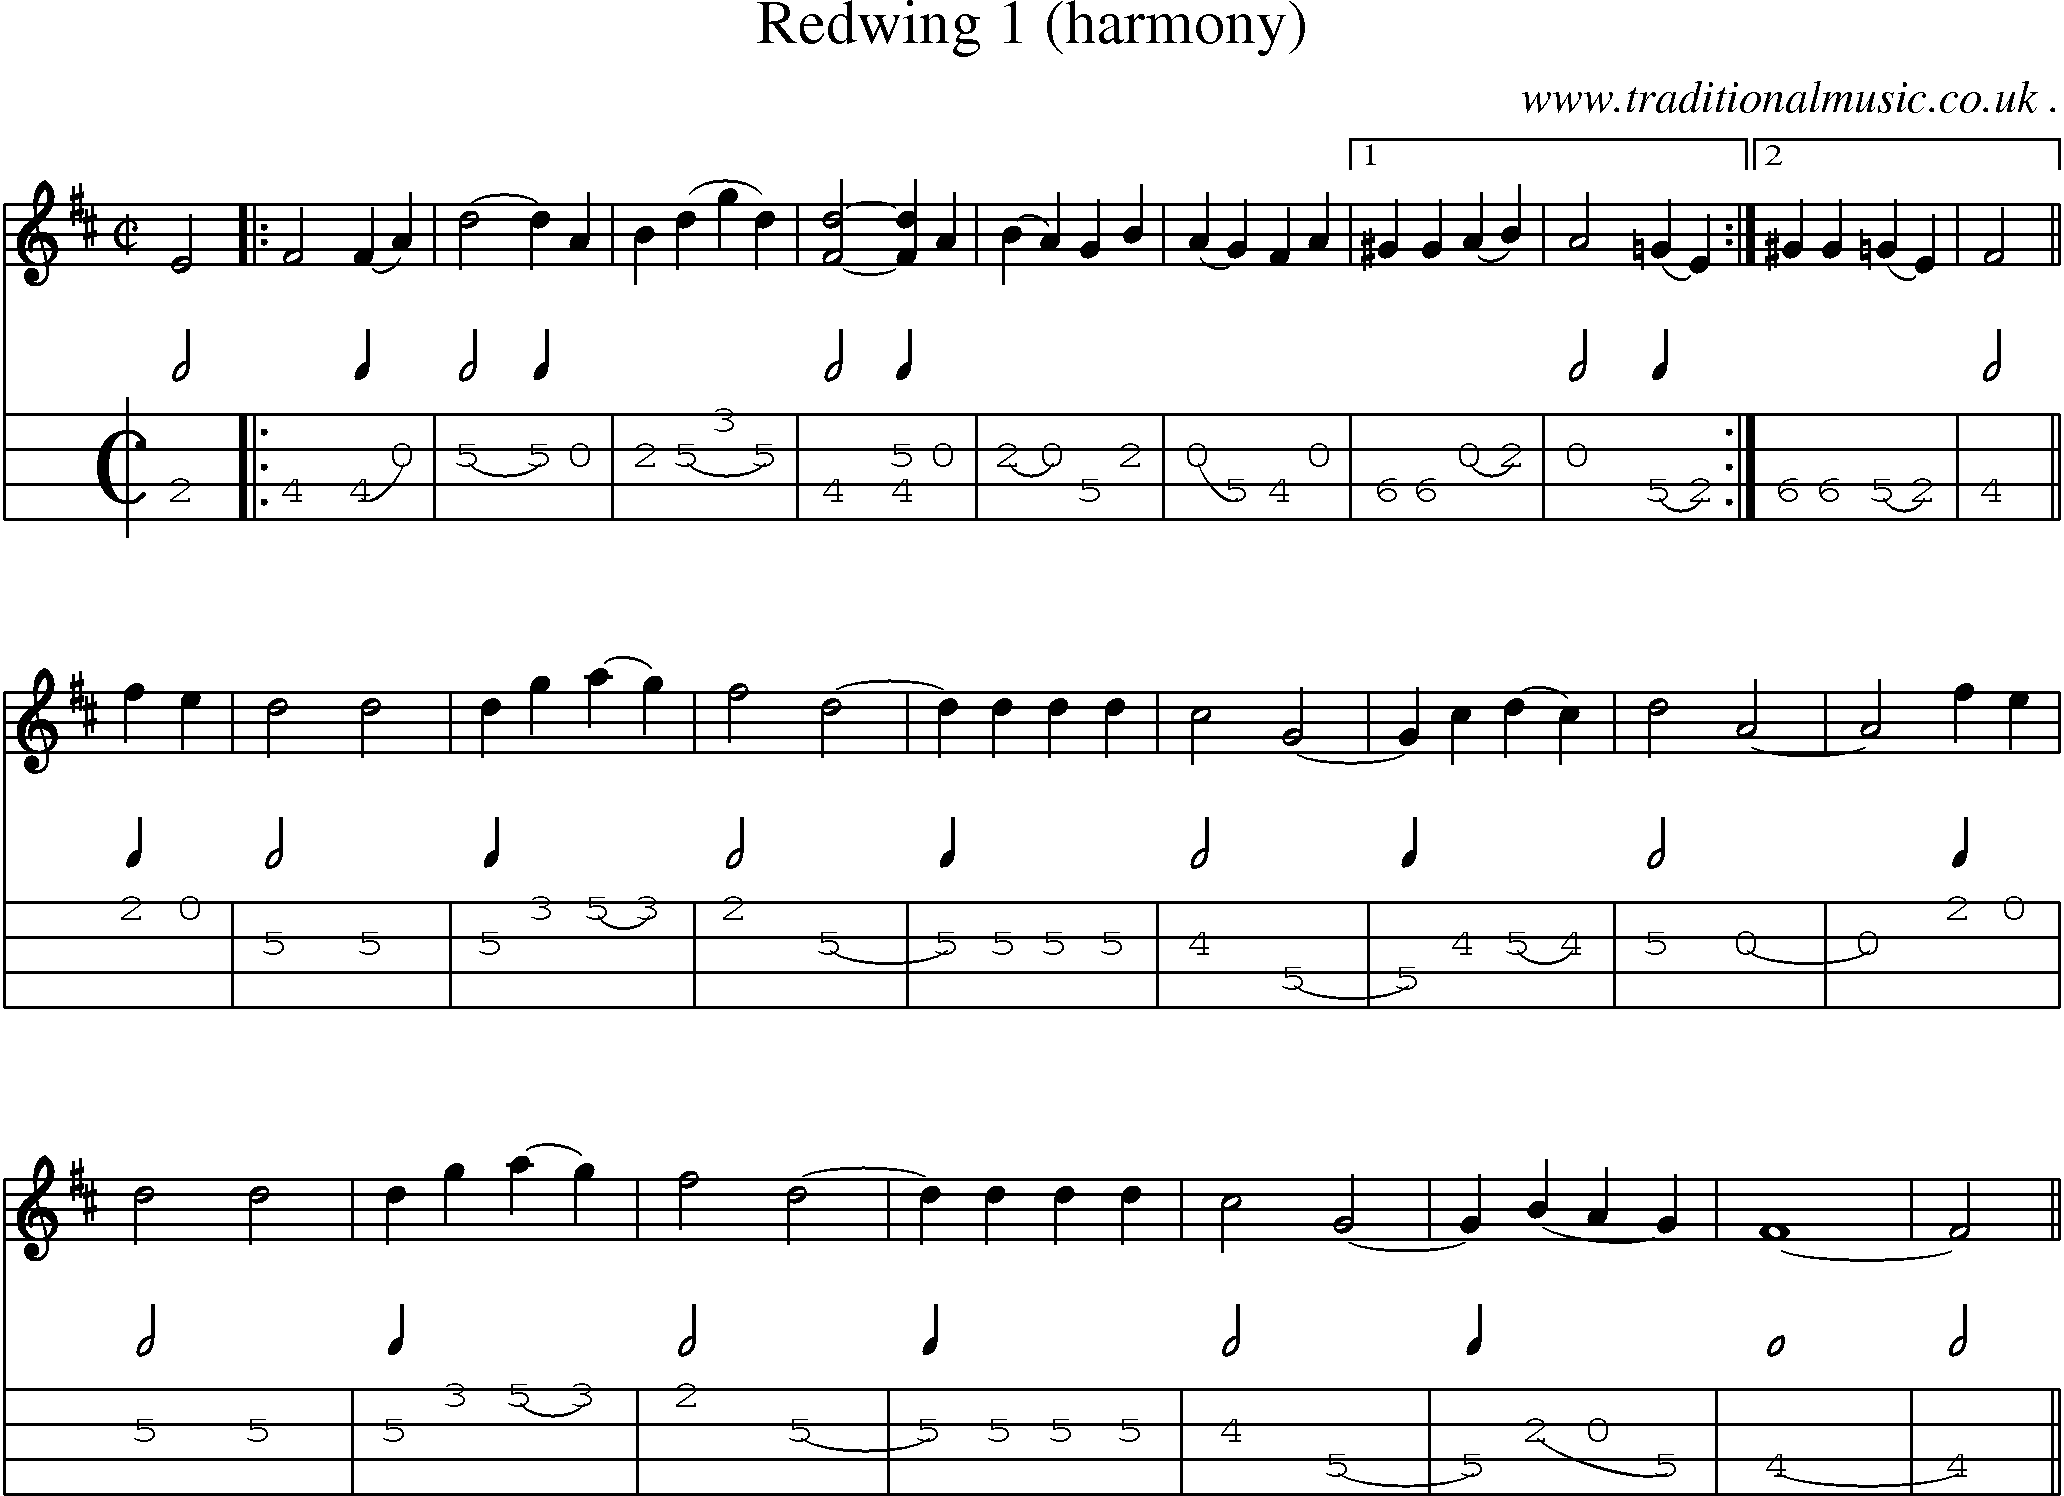 Music Score and Guitar Tabs for Redwing 1 (harmony)